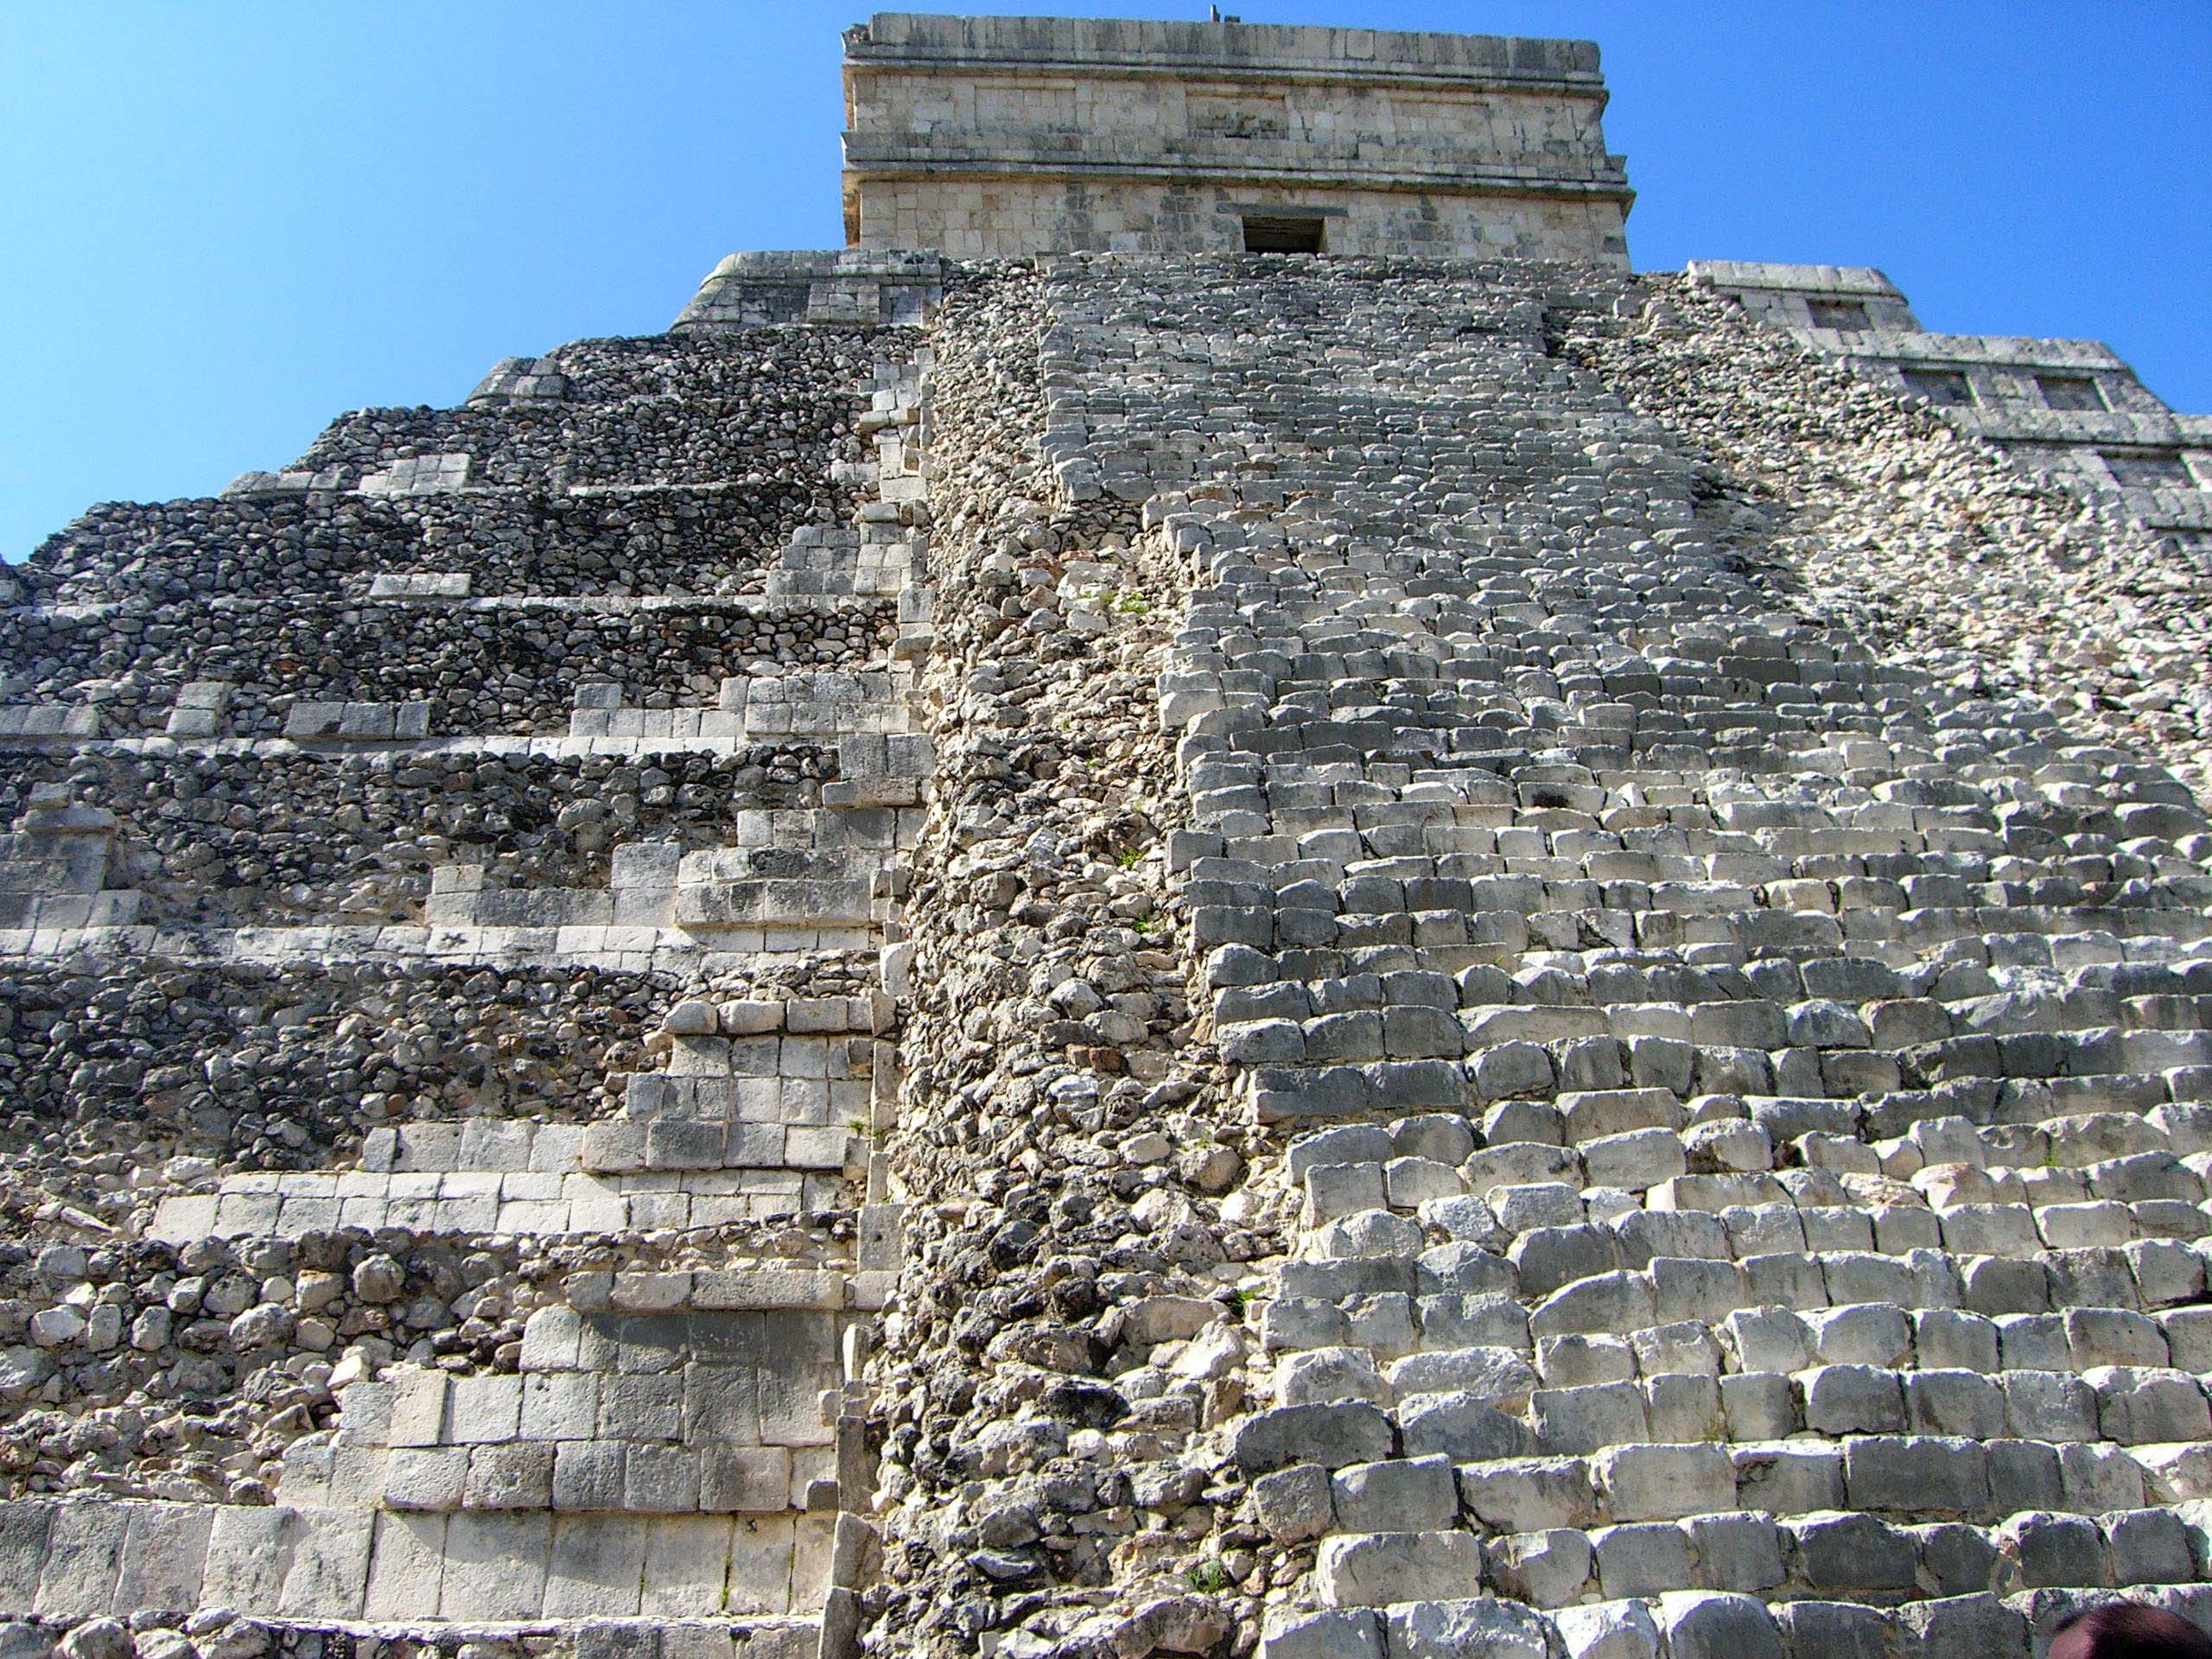 The crumbling sides of the Kukulcan pyramid